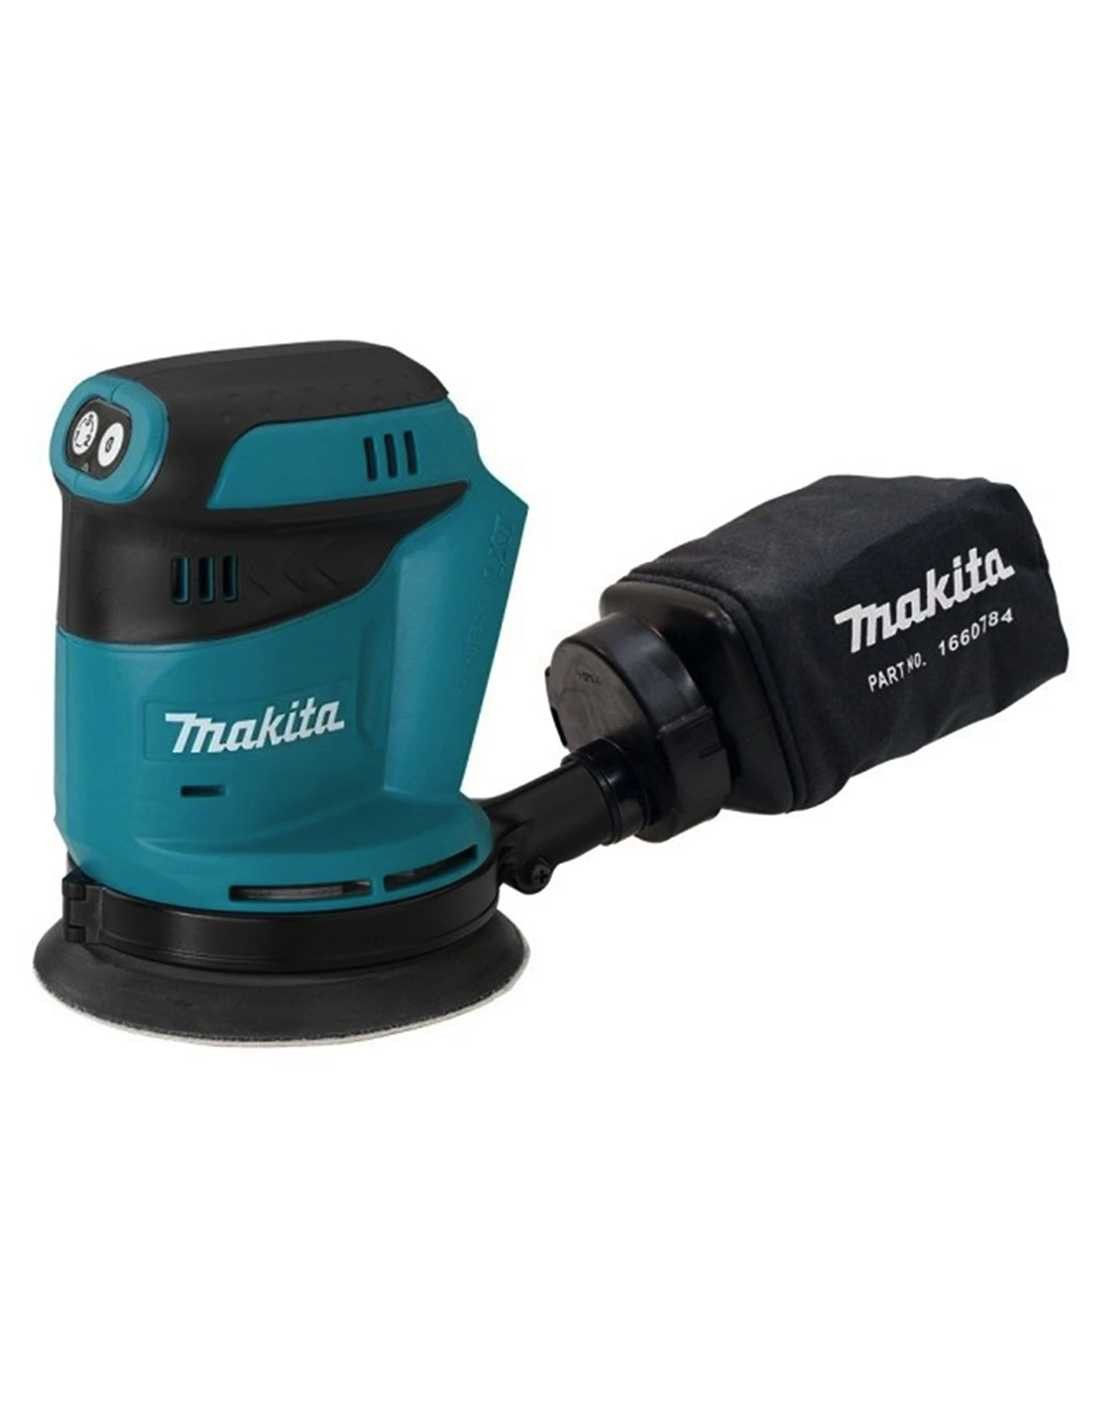 Makita kit with 11 tools + 3 bat + charger + 2 bags DLX1171BL3